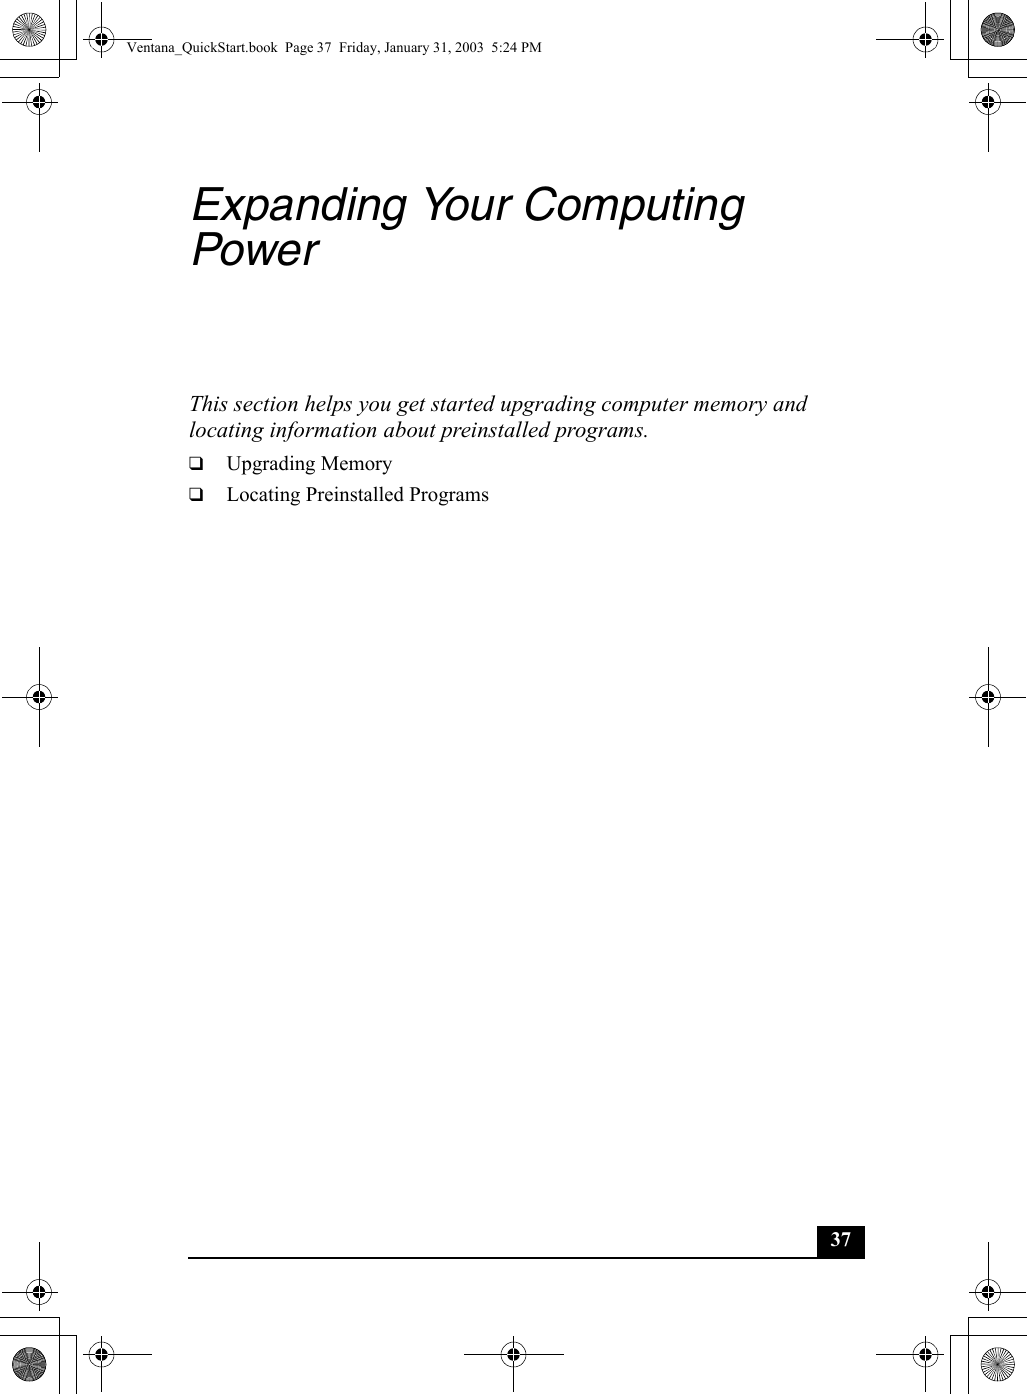 37Expanding Your Computing PowerThis section helps you get started upgrading computer memory and locating information about preinstalled programs. ❑Upgrading Memory❑Locating Preinstalled ProgramsVentana_QuickStart.book  Page 37  Friday, January 31, 2003  5:24 PM